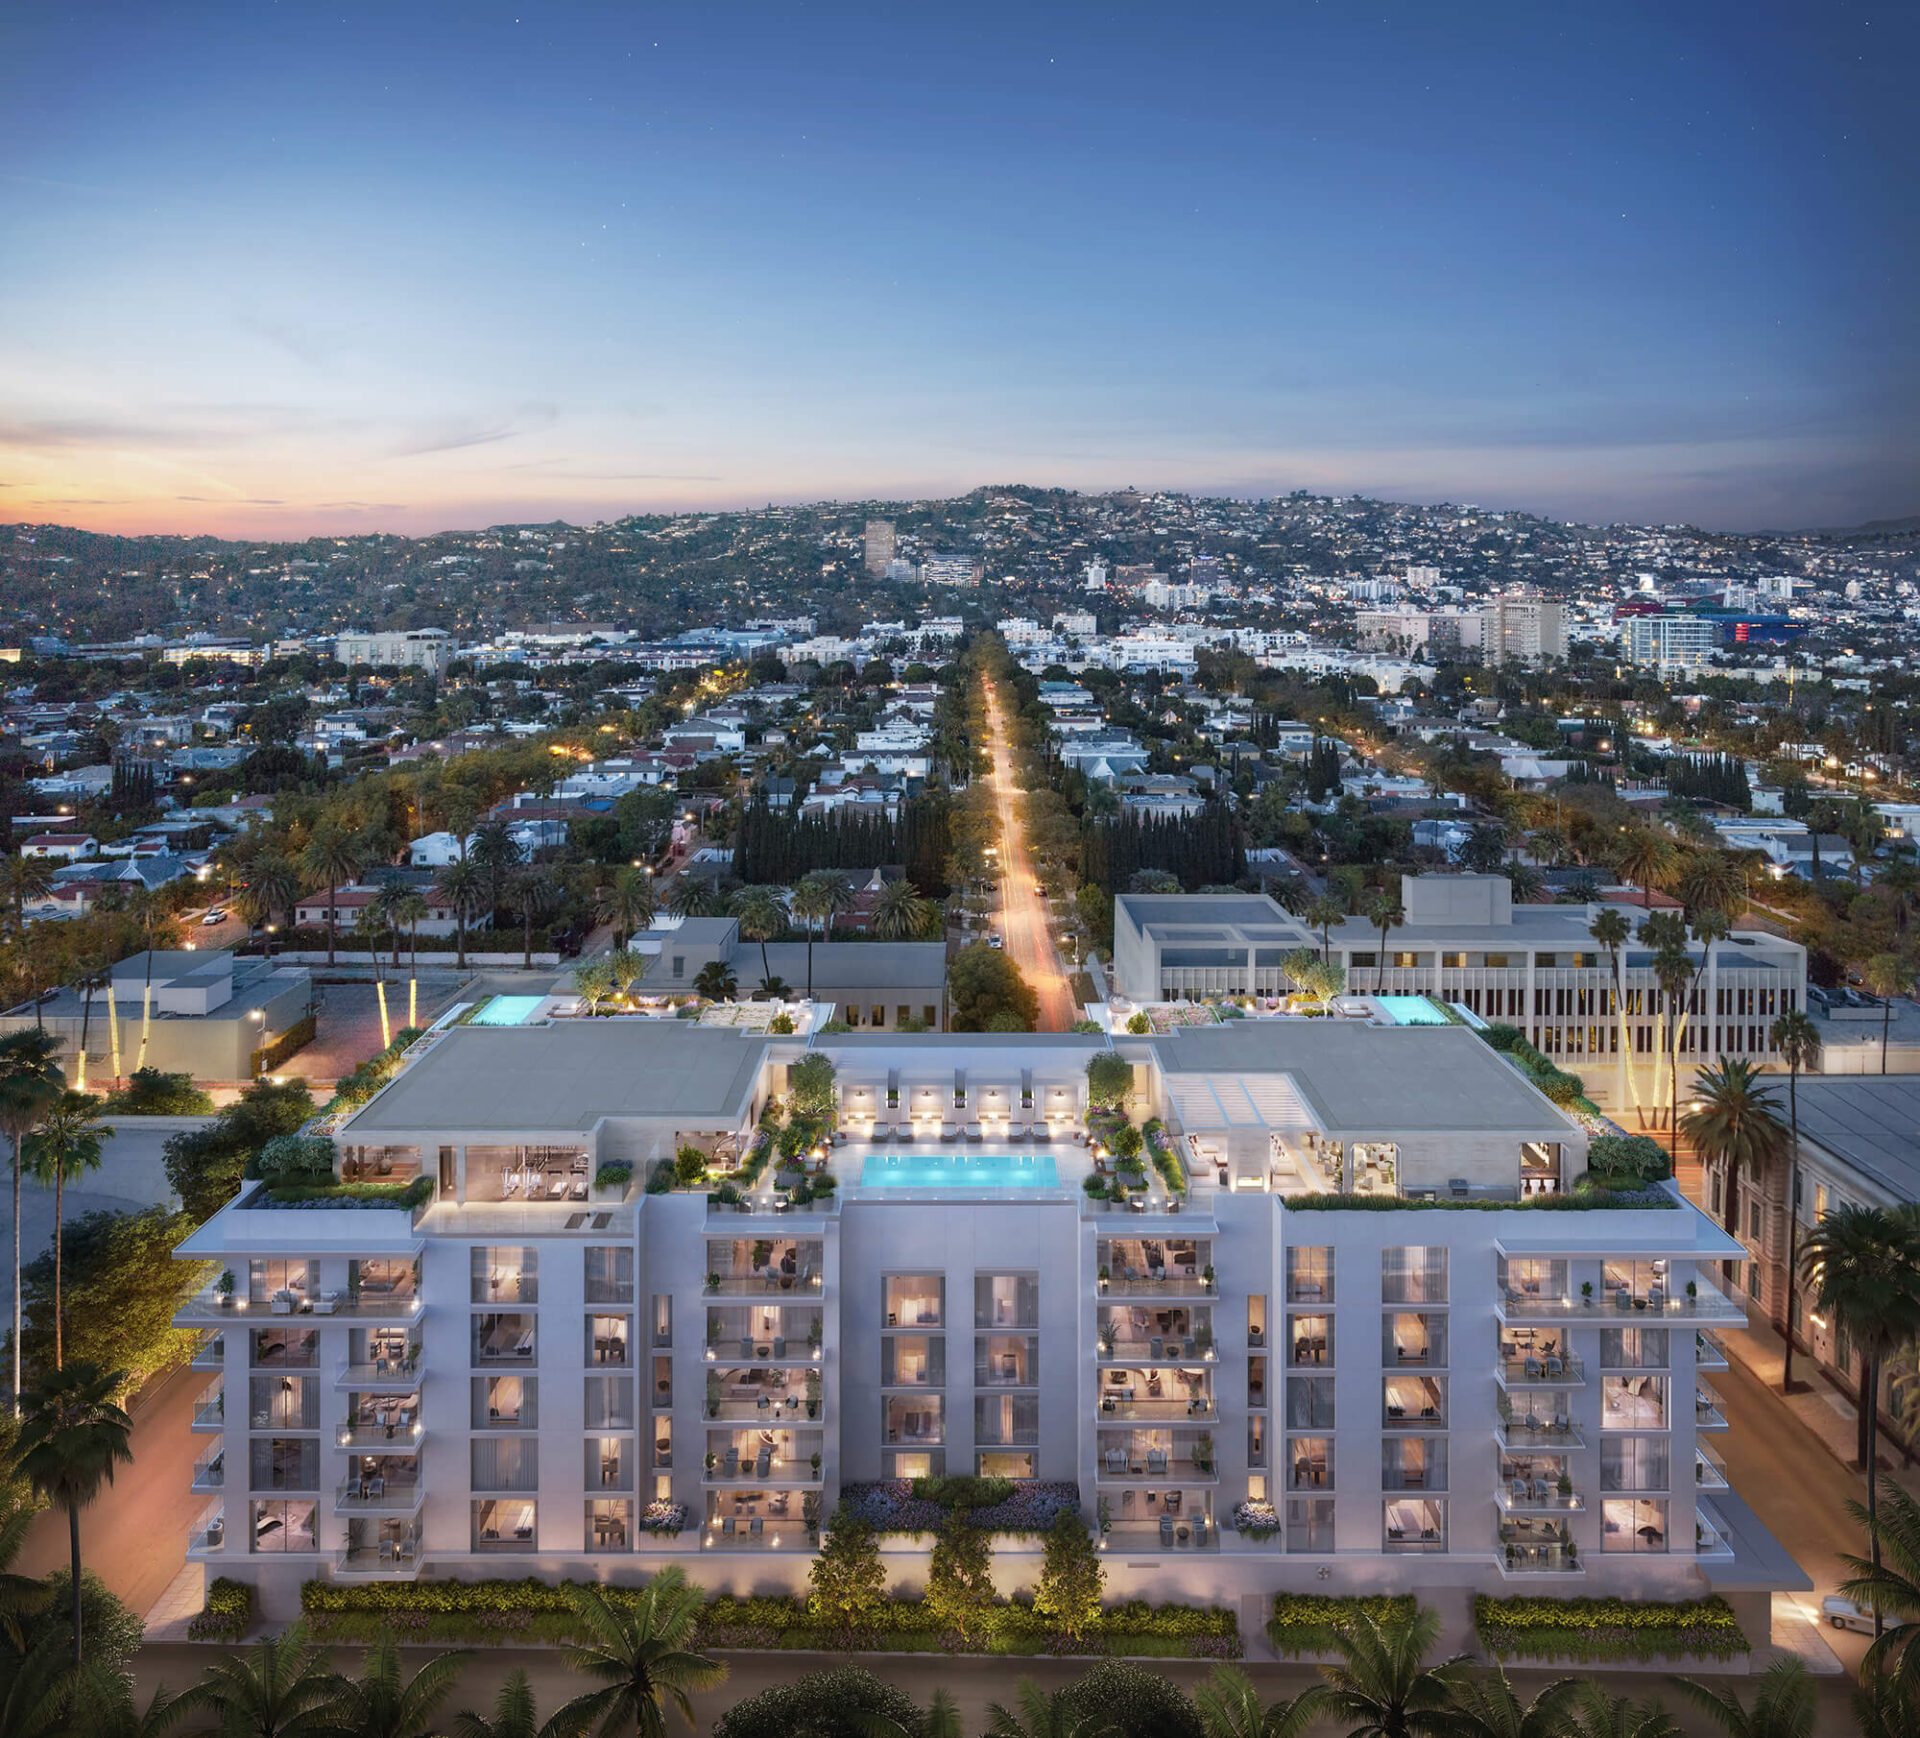 mandarin oriental beverly hills aerial rendering of the full building and surrounding area